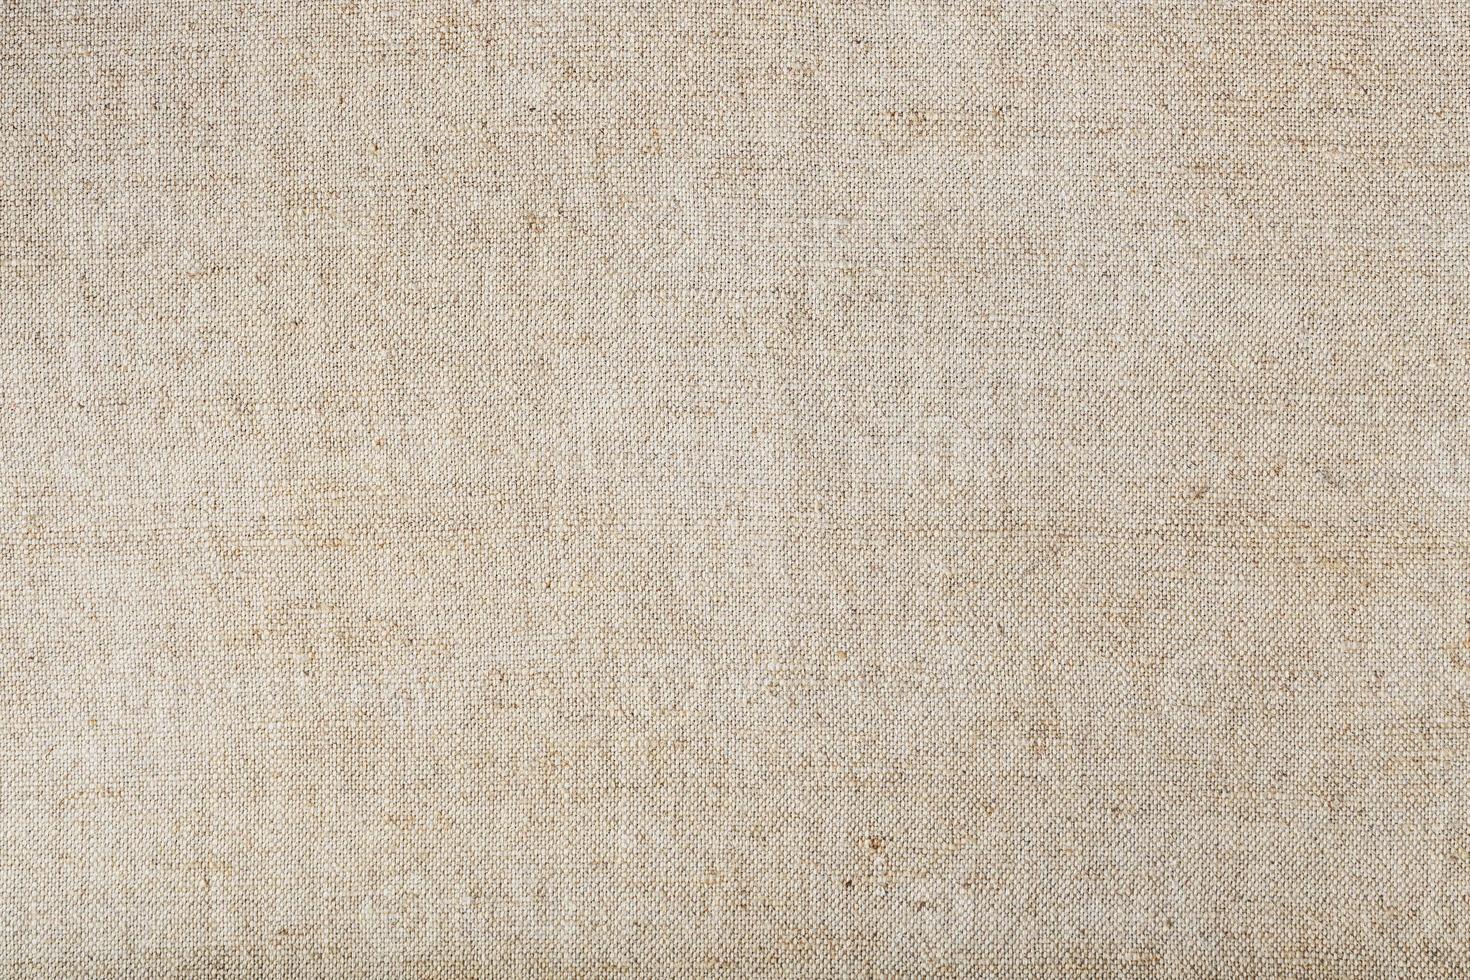 Natural burlap fabric with fibers as background. photo